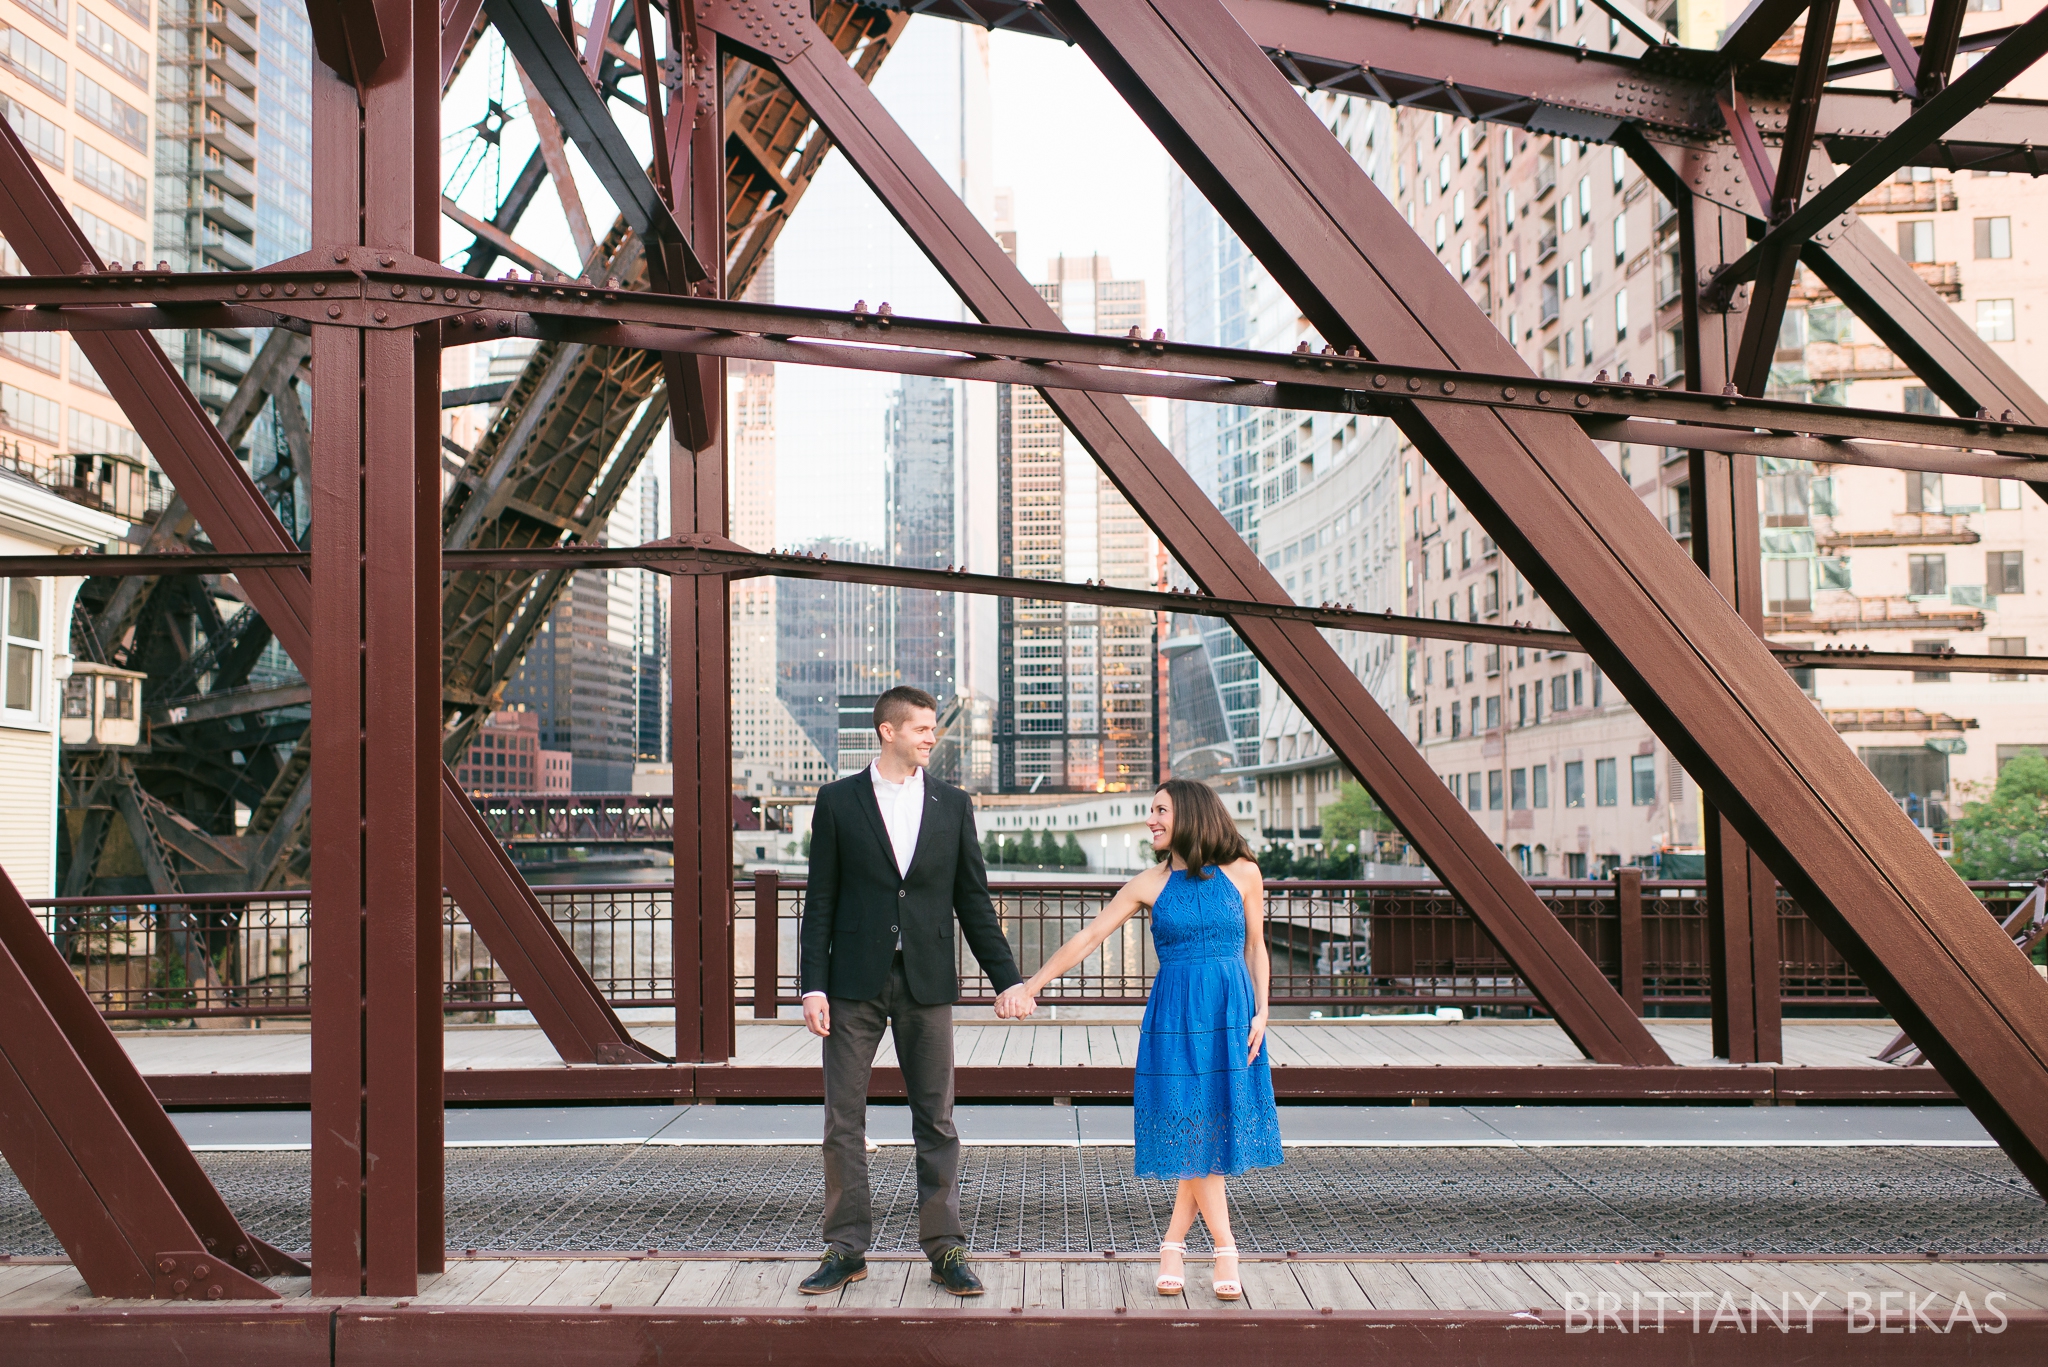 Chicago Engagement - Lincoln Park Engagement Photos - Brittany Bekas Photography_0016